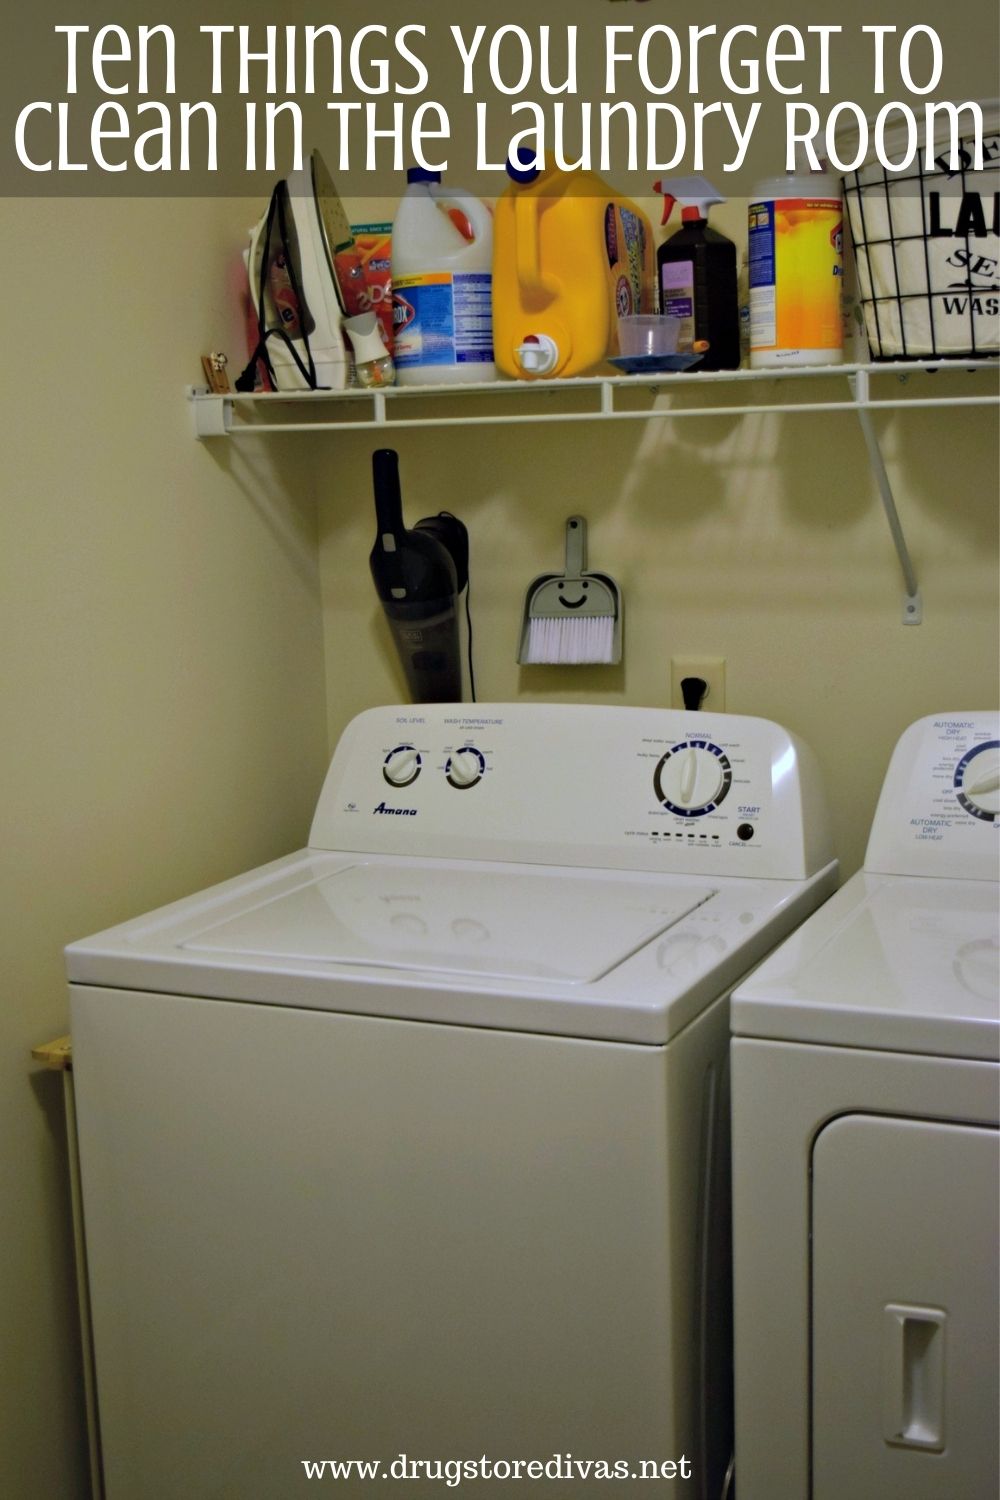 A laundry room in a home with the words "Ten Things You Forget To Clean In The Laundry Room" digitally written above it.